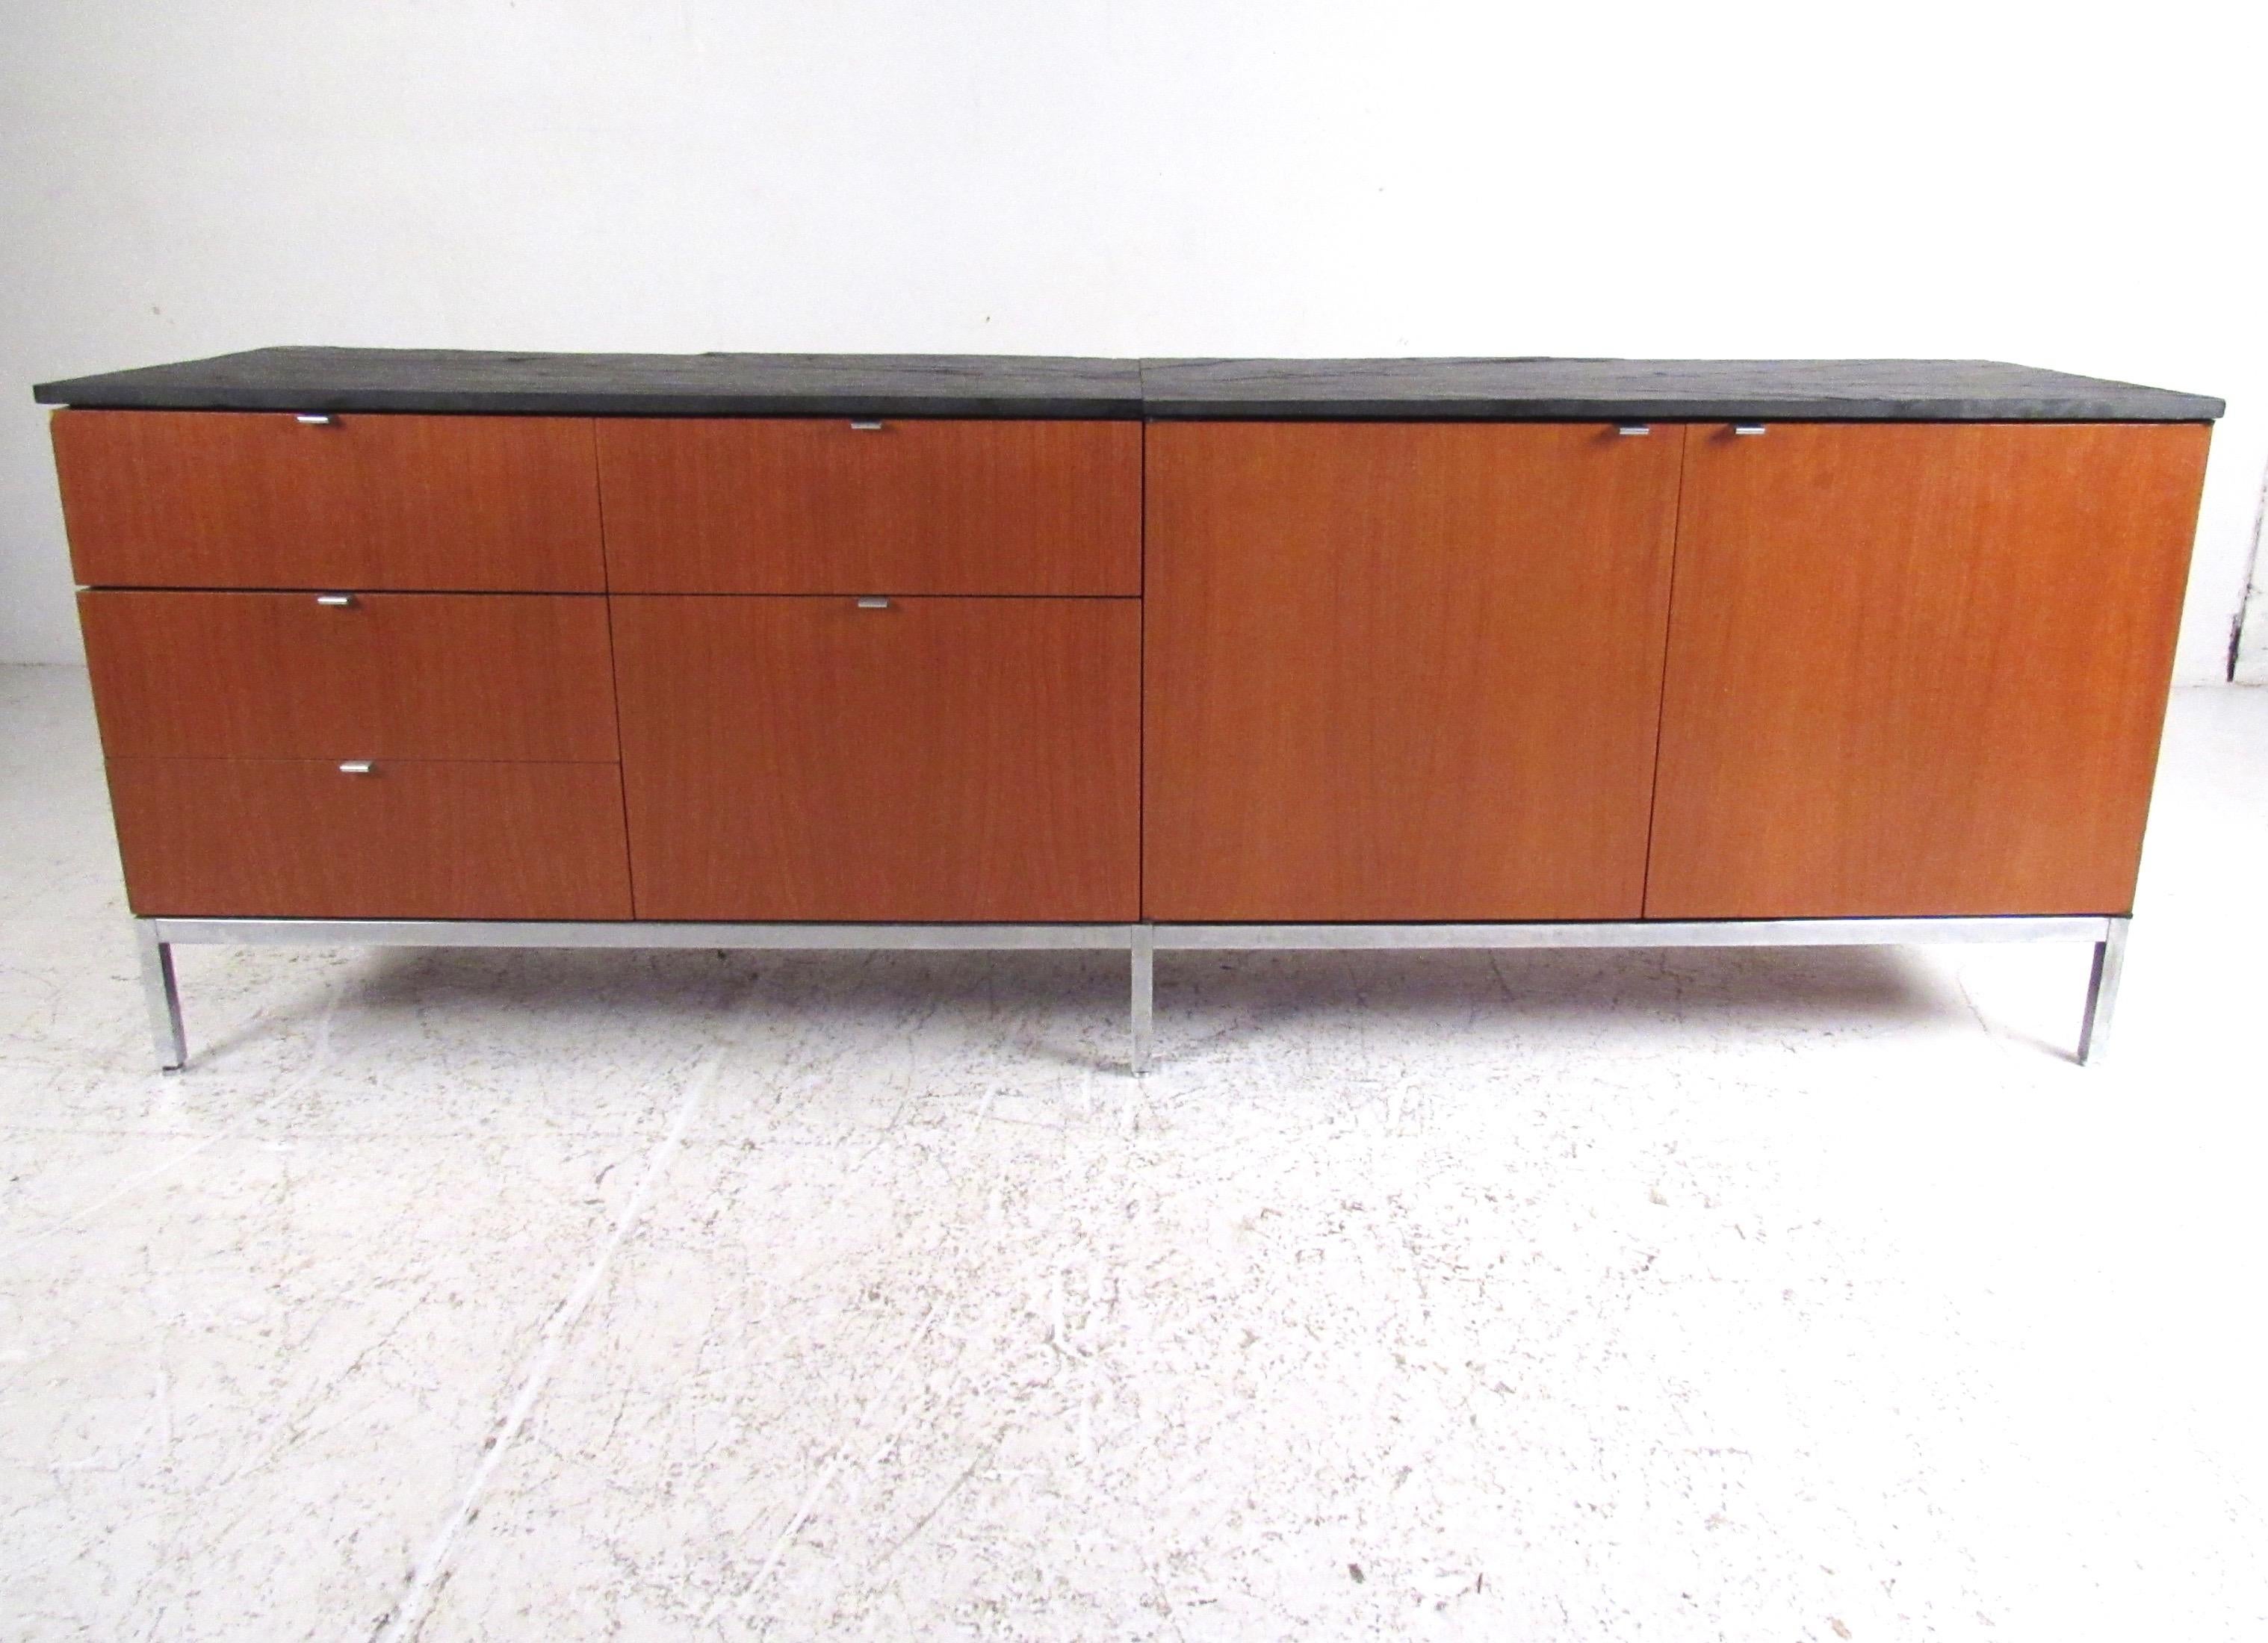 This beautiful Mid-Century Modern sideboard features rich vintage walnut finish, chrome drawer pulls, partially finished back, and stunning slate top design. Ideal office credenza for elegant home or business workspace. Spacious storage options for